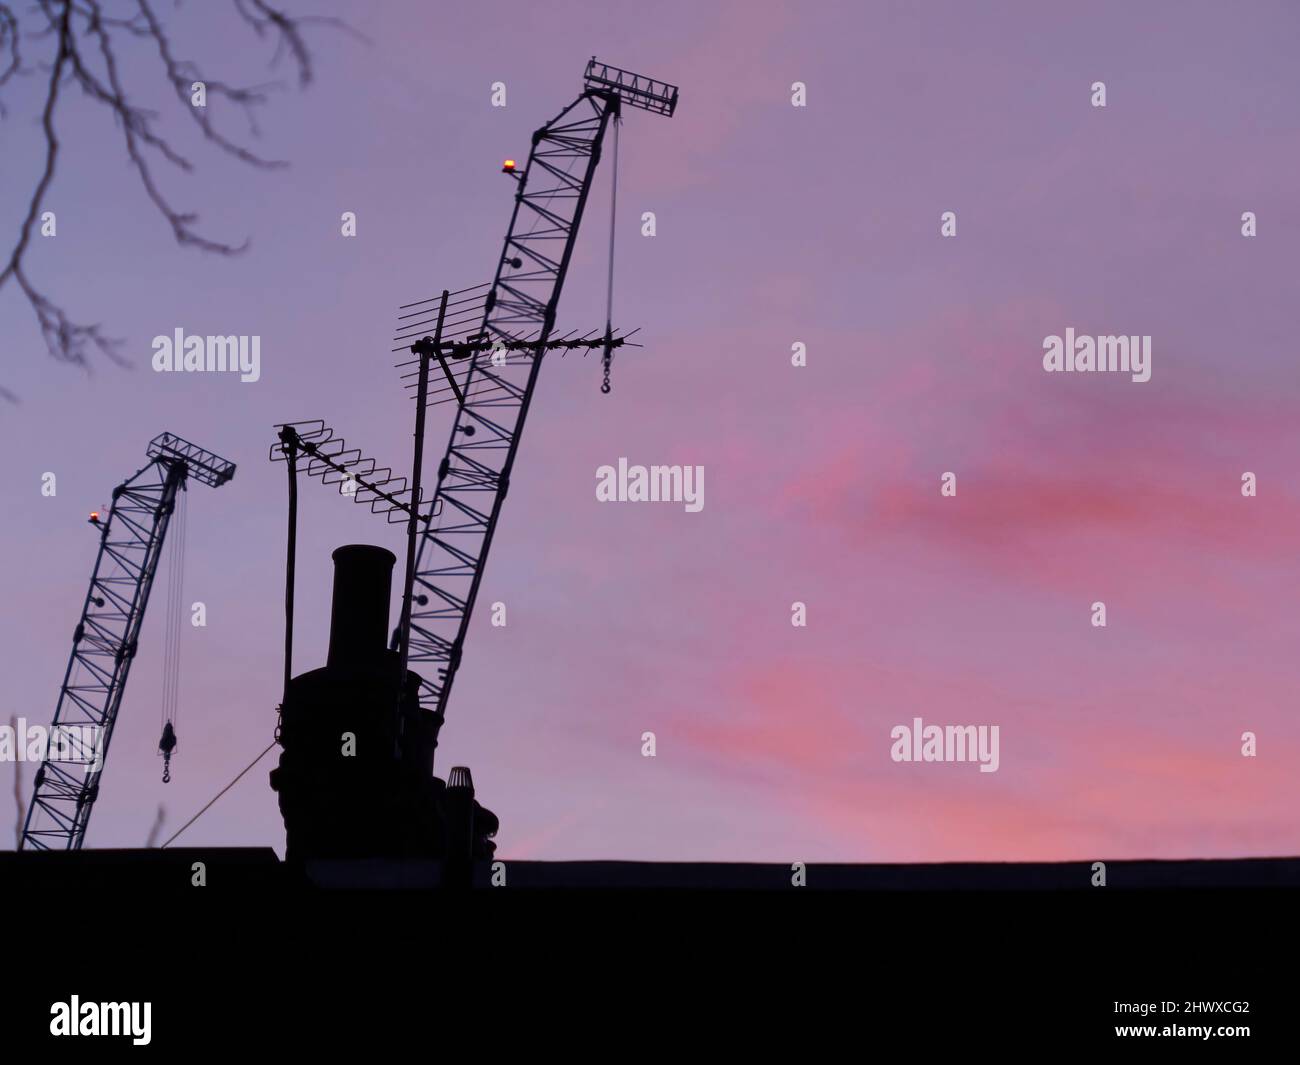 A vibrant, rich dawn over London, with cranes, chimney pots and aerials silhouetted against a purple, pink and red sky. Stock Photo